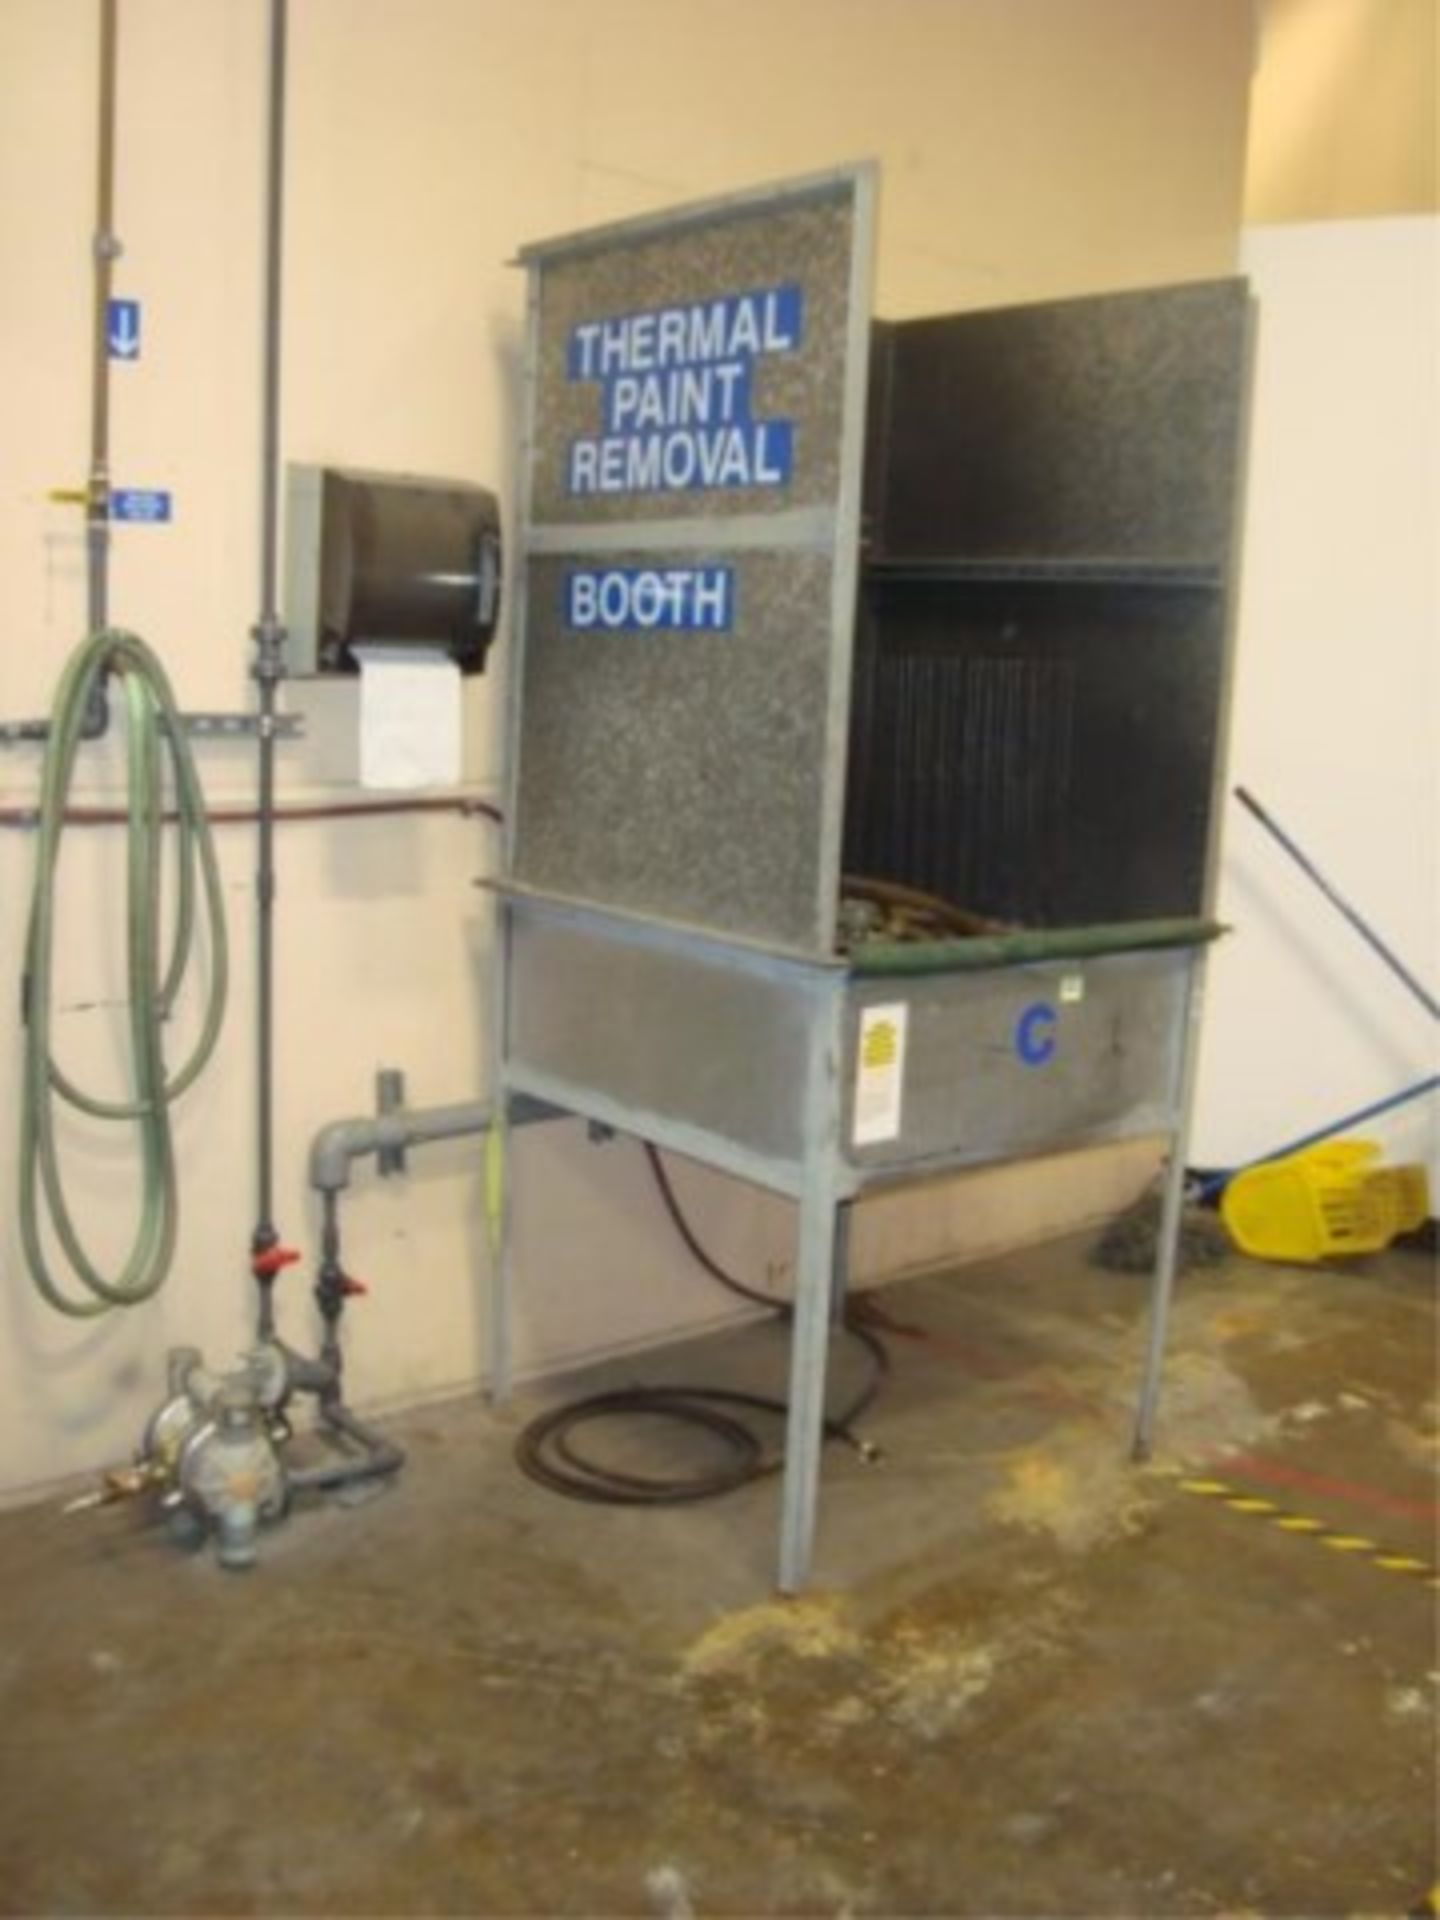 Thermal Paint Removal Booth